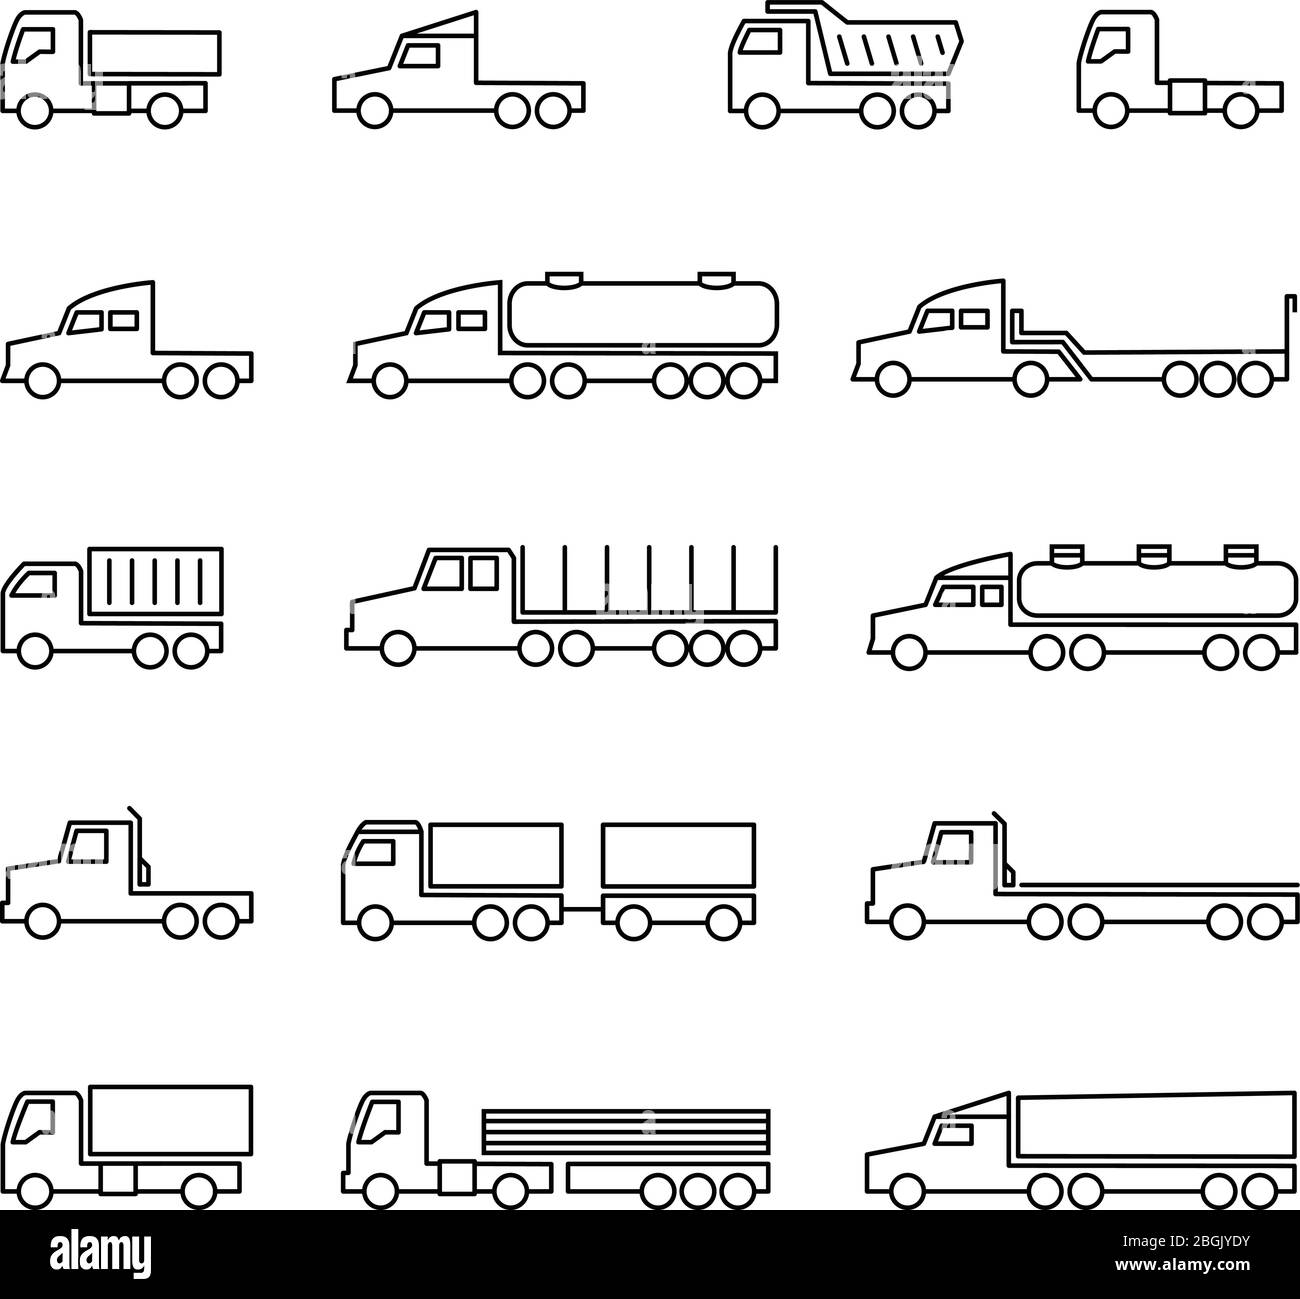 Truck line icons. Delivery trailers, cargo trukcs, dumpers and van. Transportation vector outline isolated symbols. Vehicle van, dumper lorry for cargo freight illustration Stock Vector